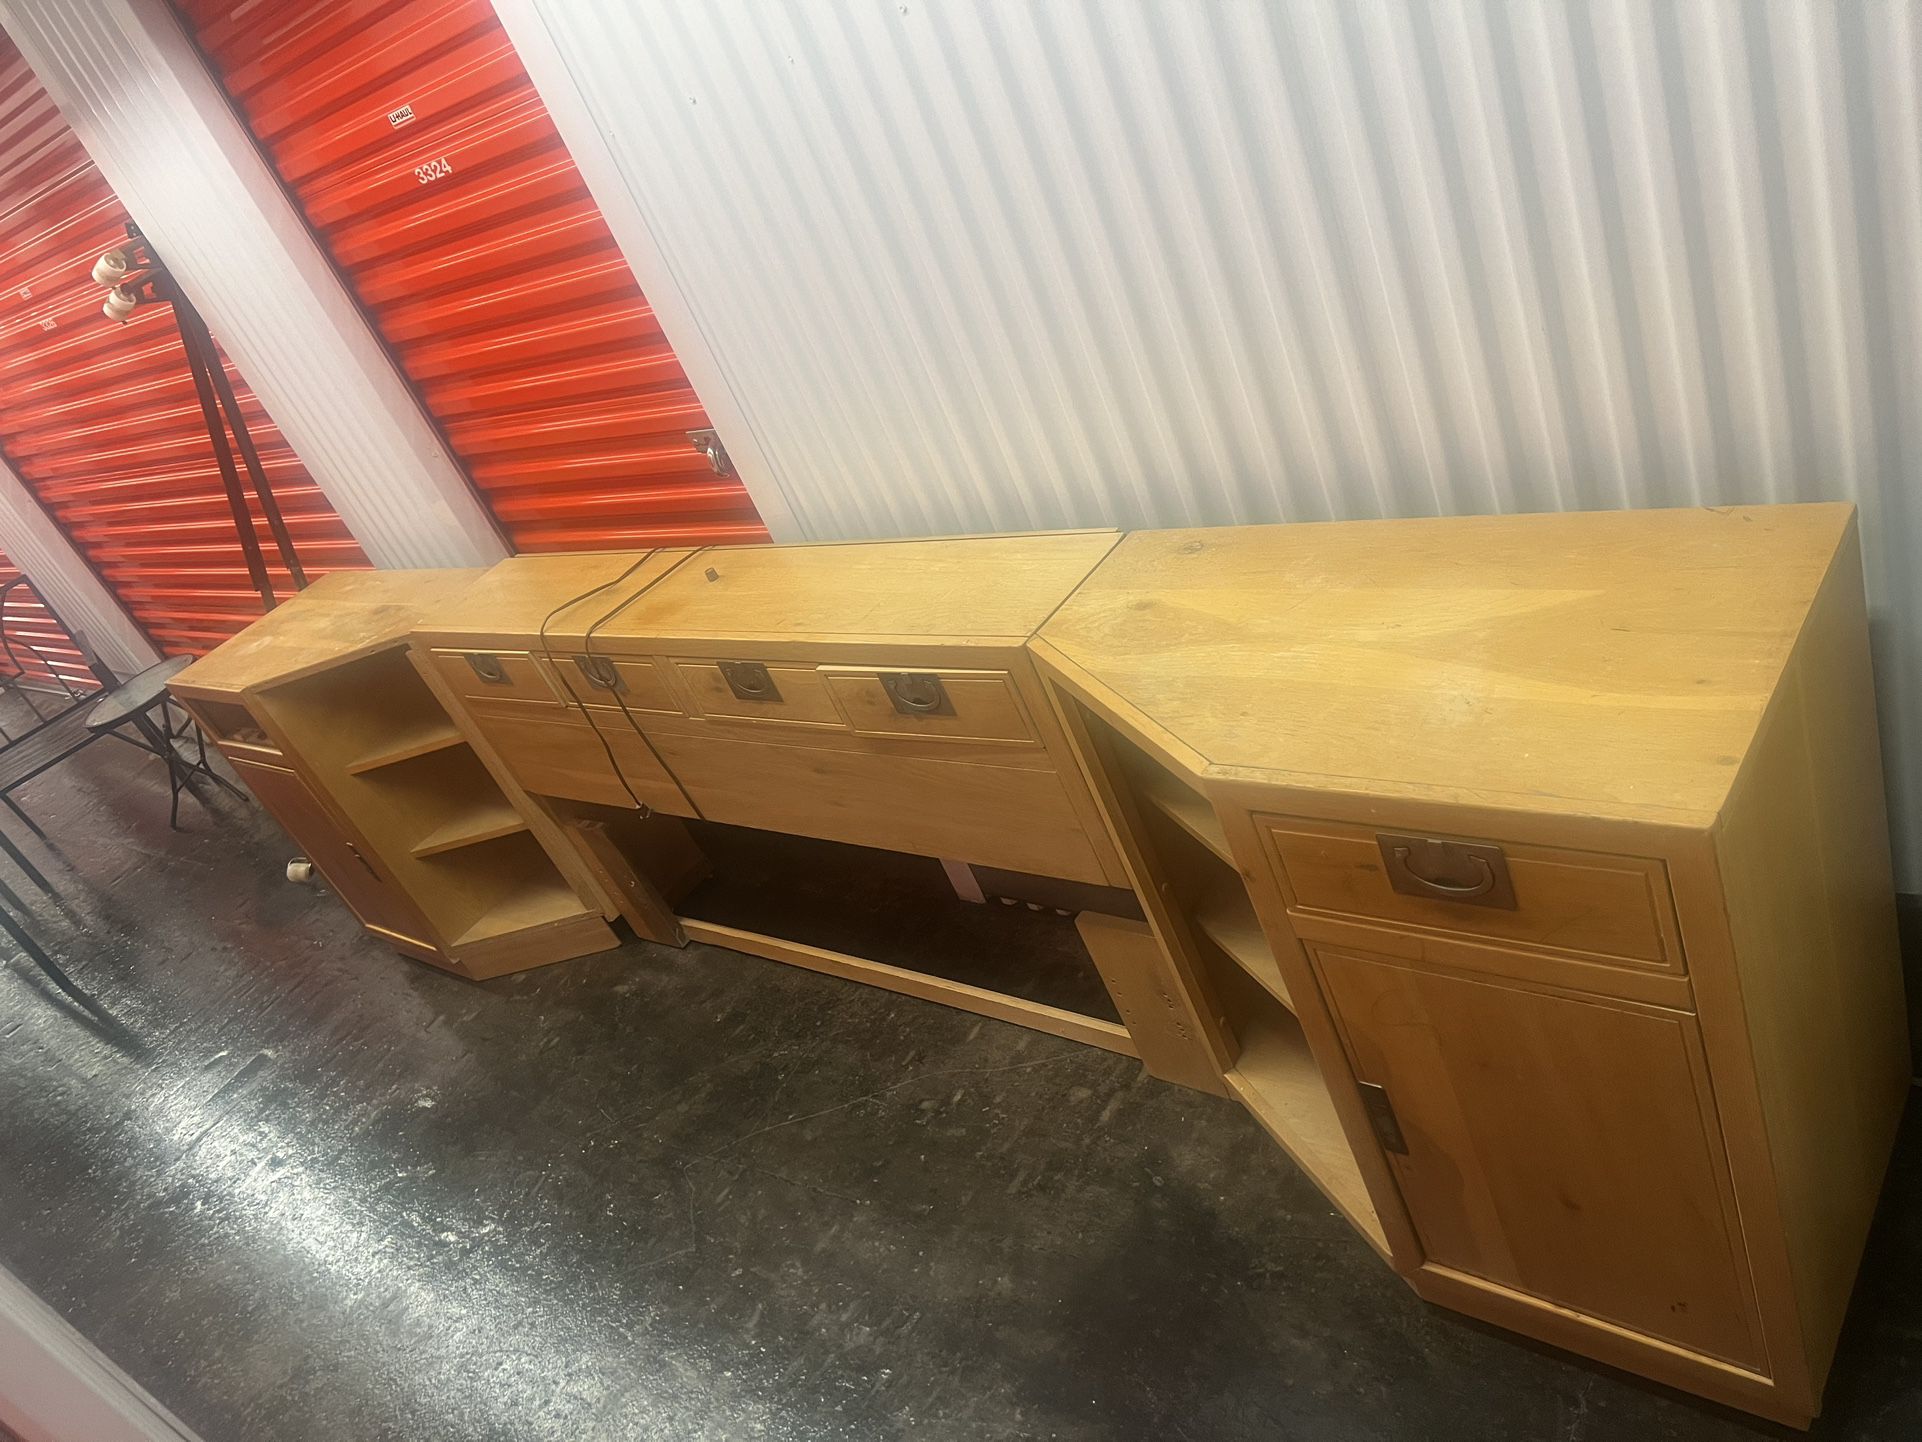 Solid Wooden Bedroom Set Includes A Huge Dresser, 2 Nightstands, Headboard, and Metal Bed Frame. Very Heavy Will Need At Least 2 People to Carry It Ou